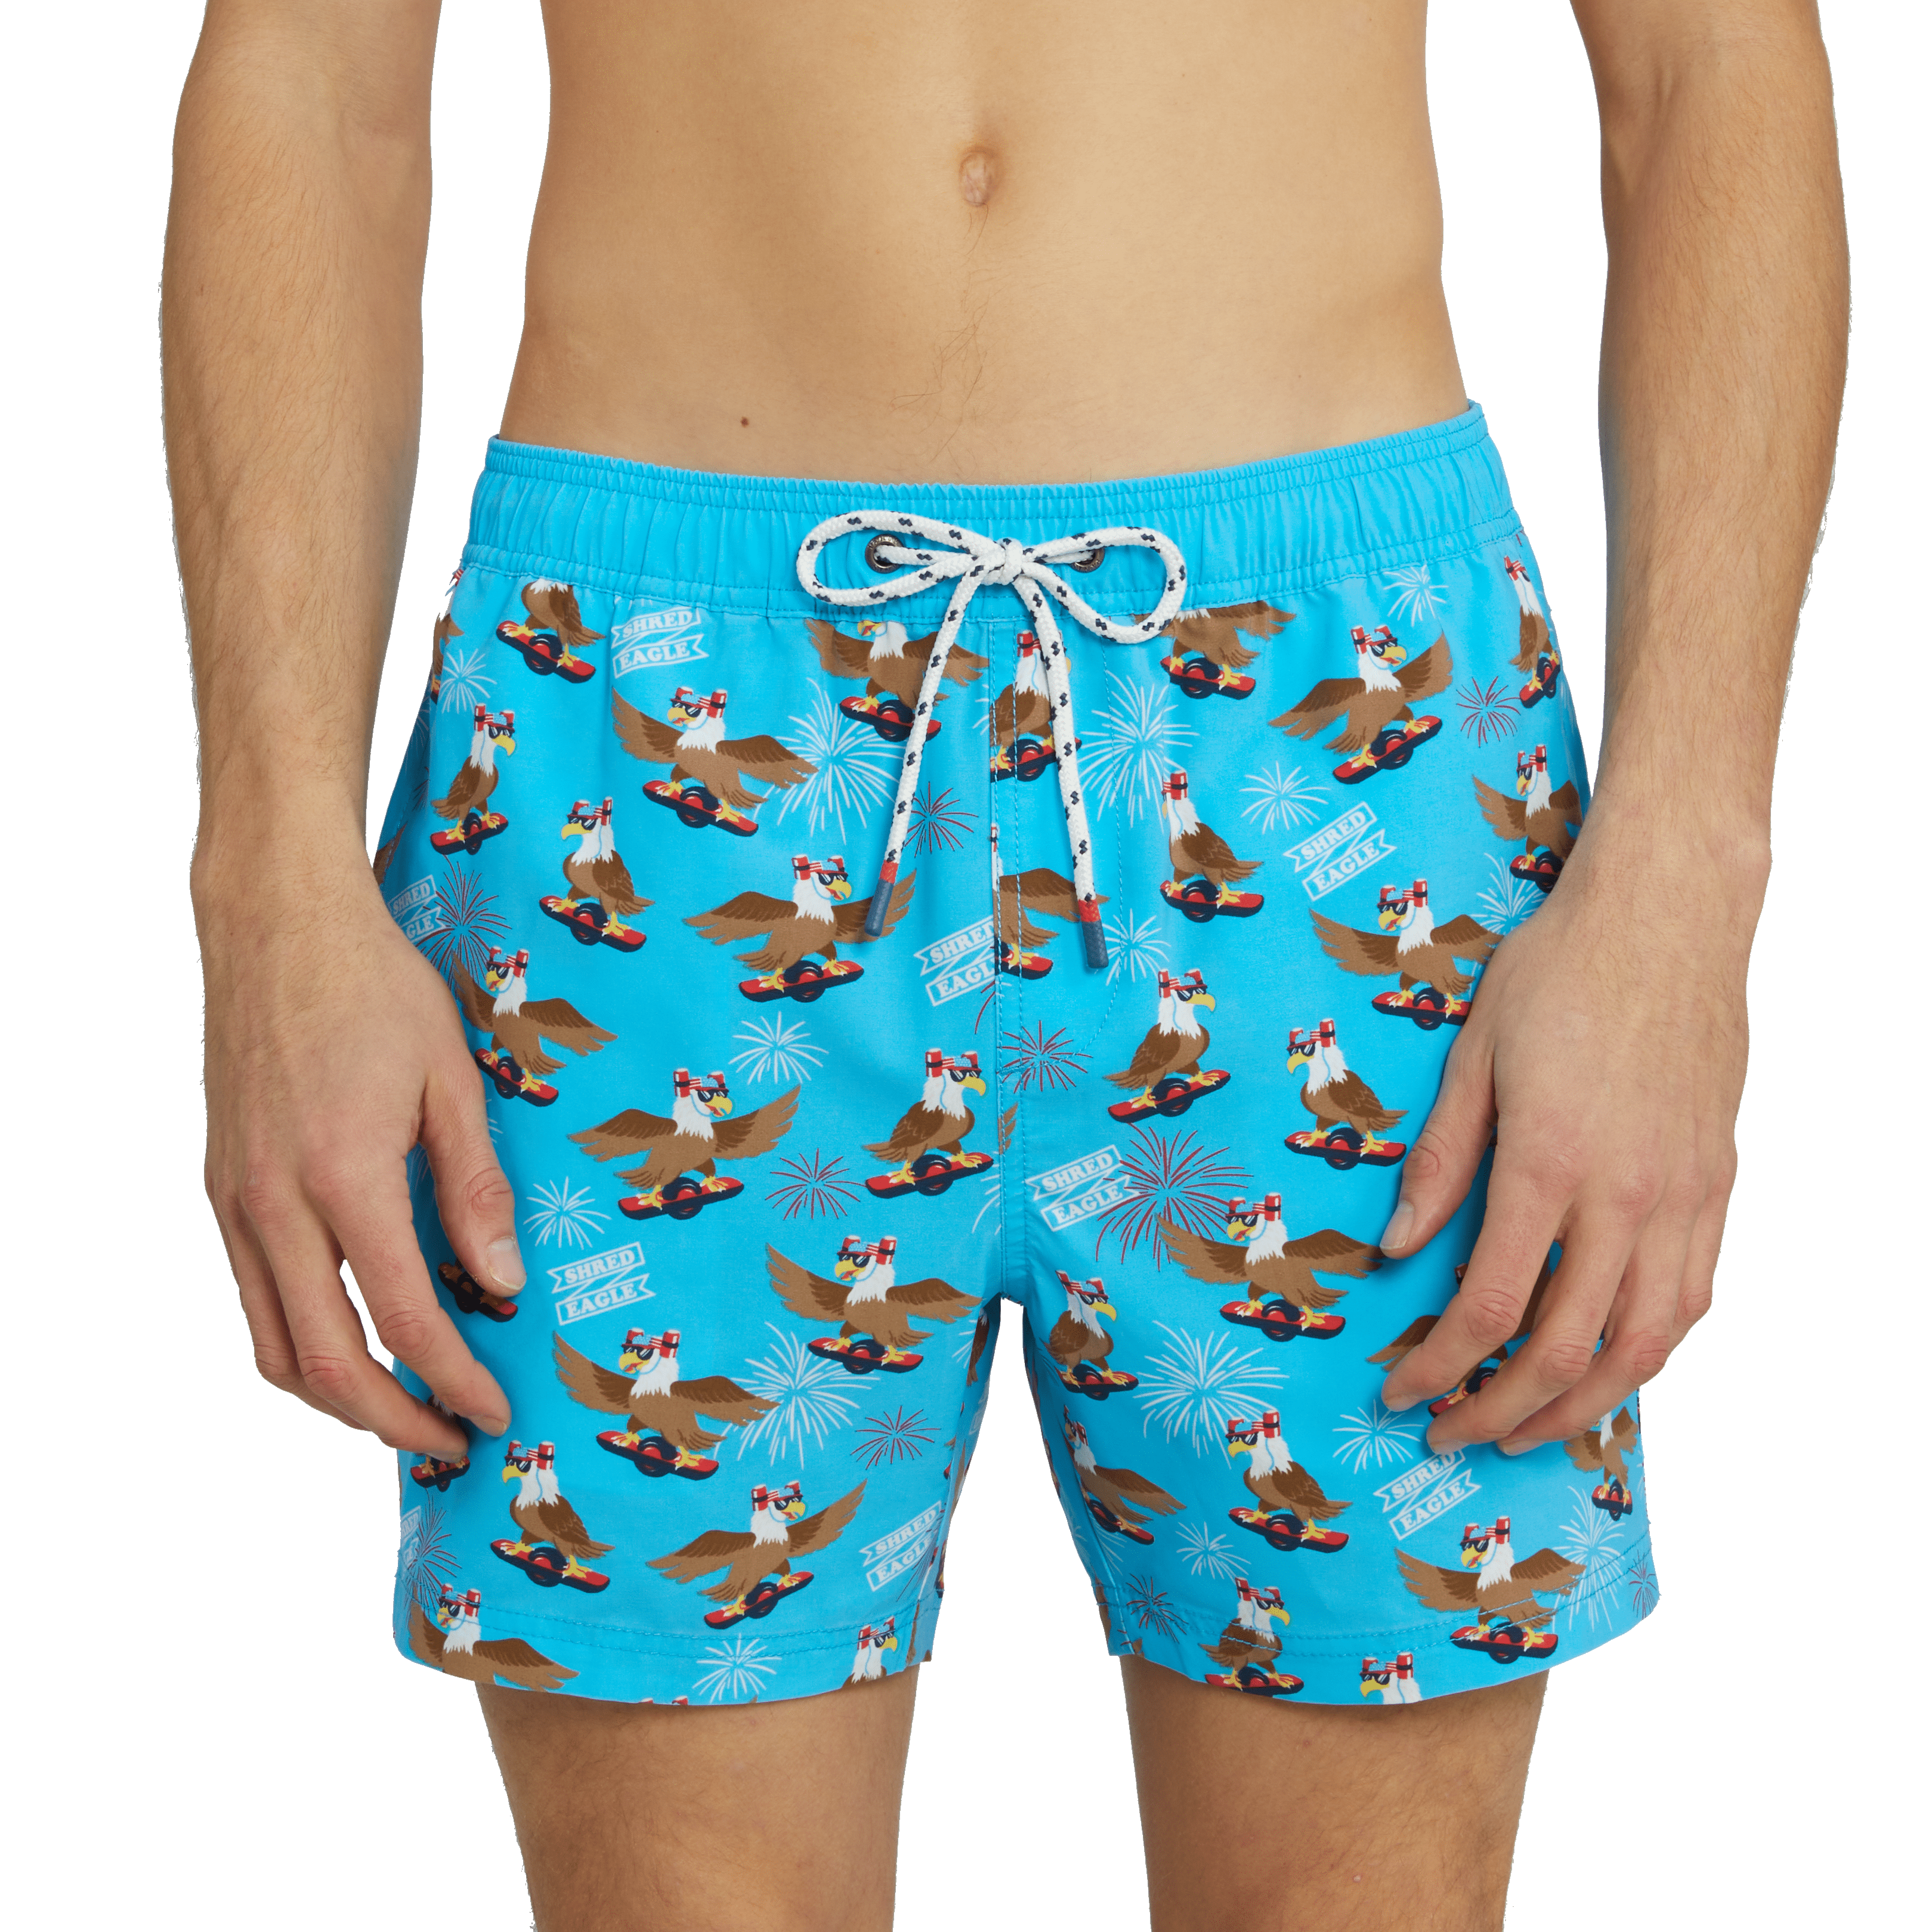 SHRED EAGLE PARTY STARTER SHORT - BLUE PARTY STARTER SHORTS PARTY PANTS 